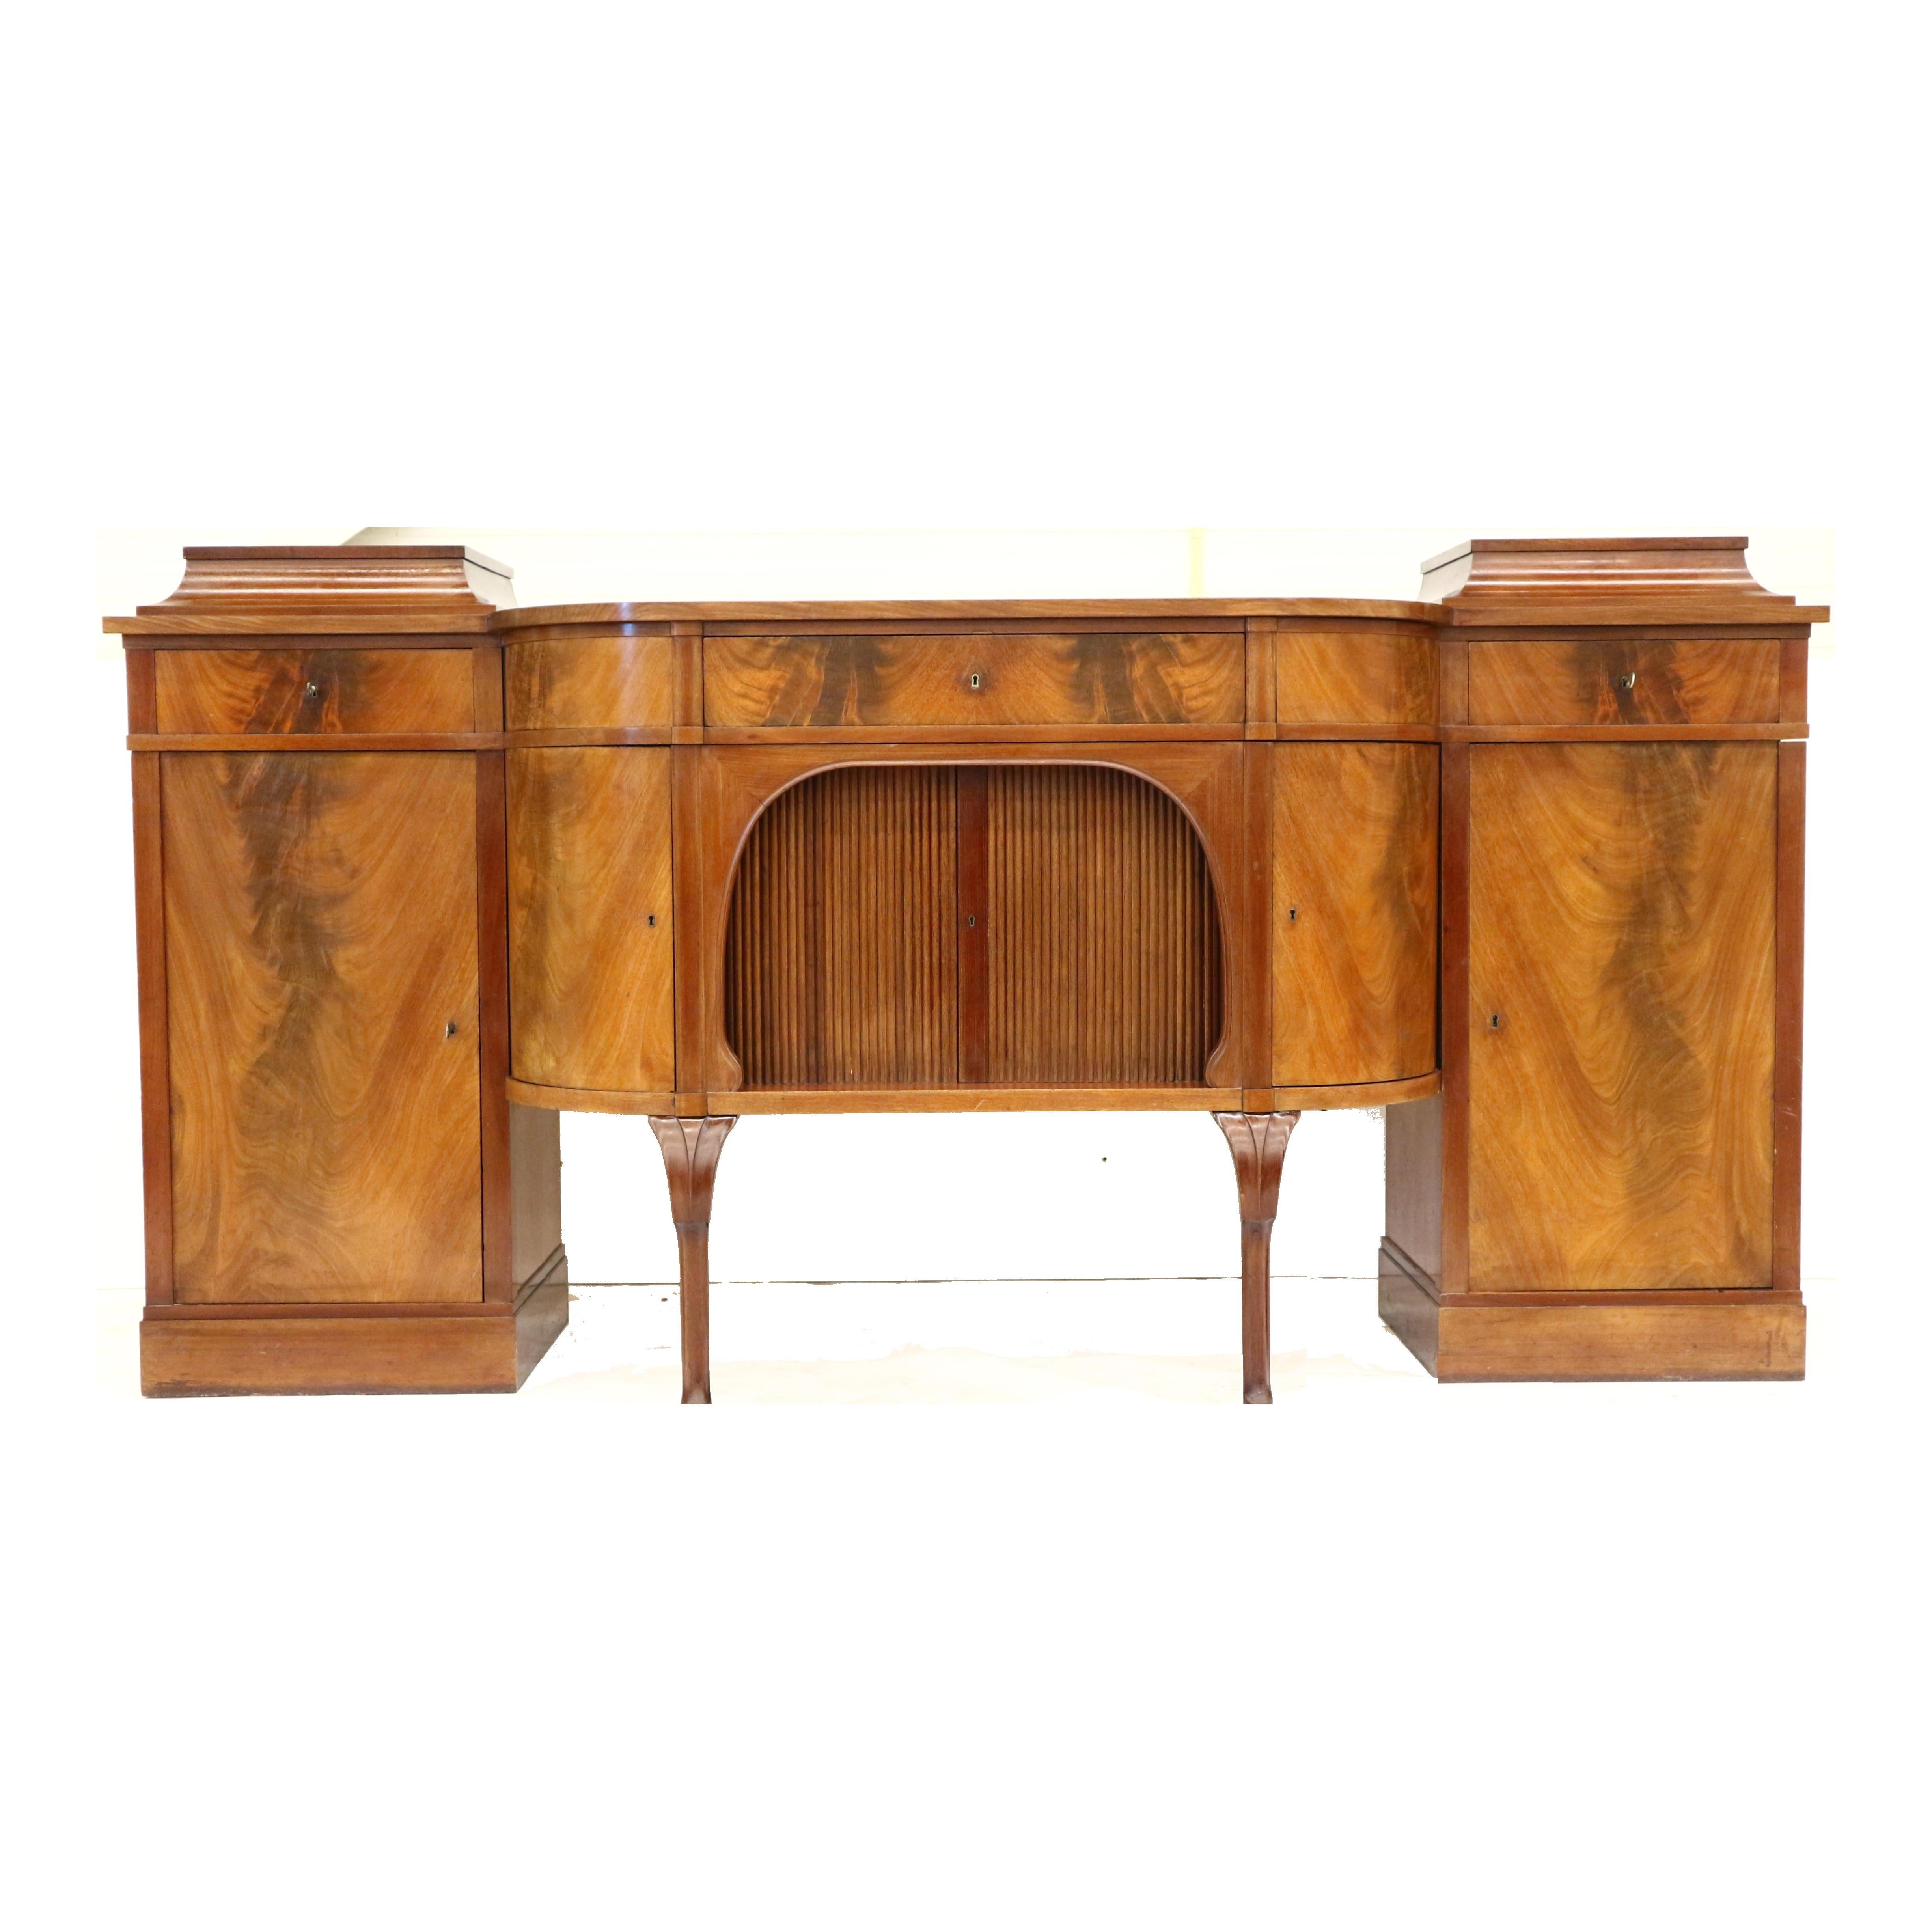 Unique Victorian flamed mahogany sideboard from the 19th century. This beautiful sideboard consists of 3 sections that are beautifully finished.

Dimensions:
Width: 219.1 cm
Height: 110.2 cm
Depth: 62 cm

The sideboard has traces of use appropriate